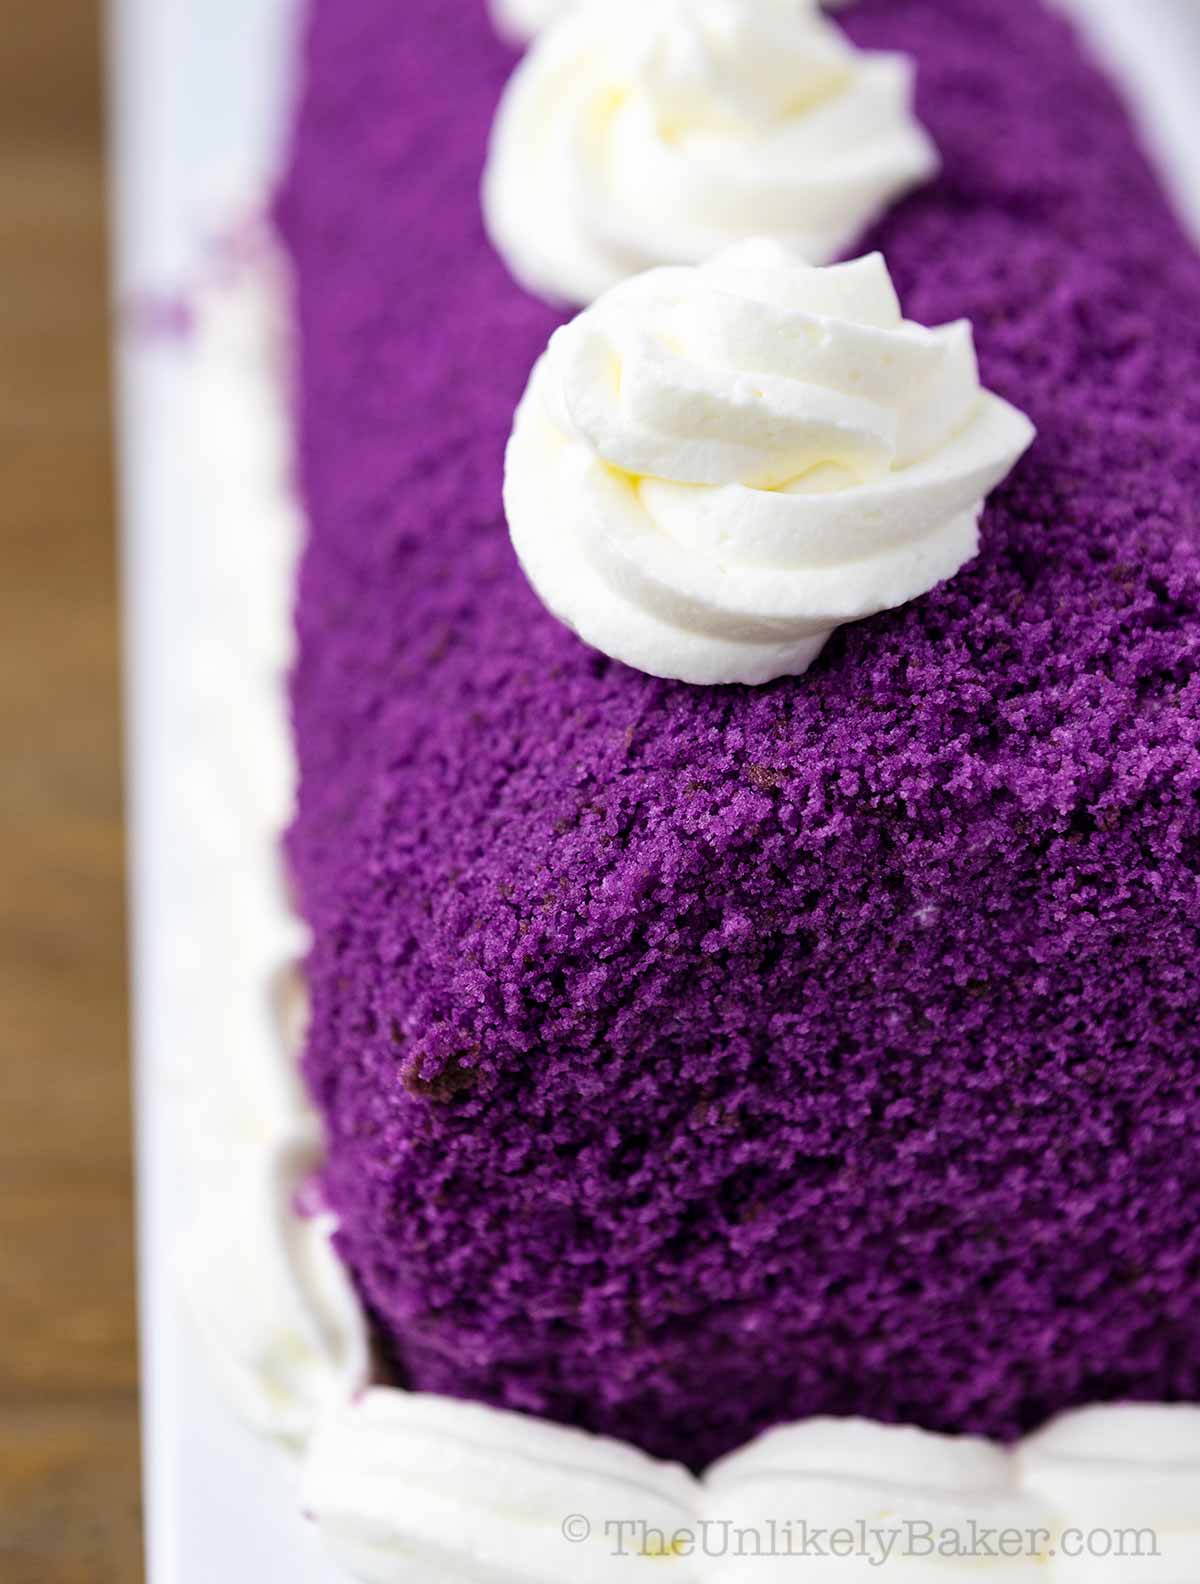 Freshly baked ube roll cake with whipped cream cheese frosting.